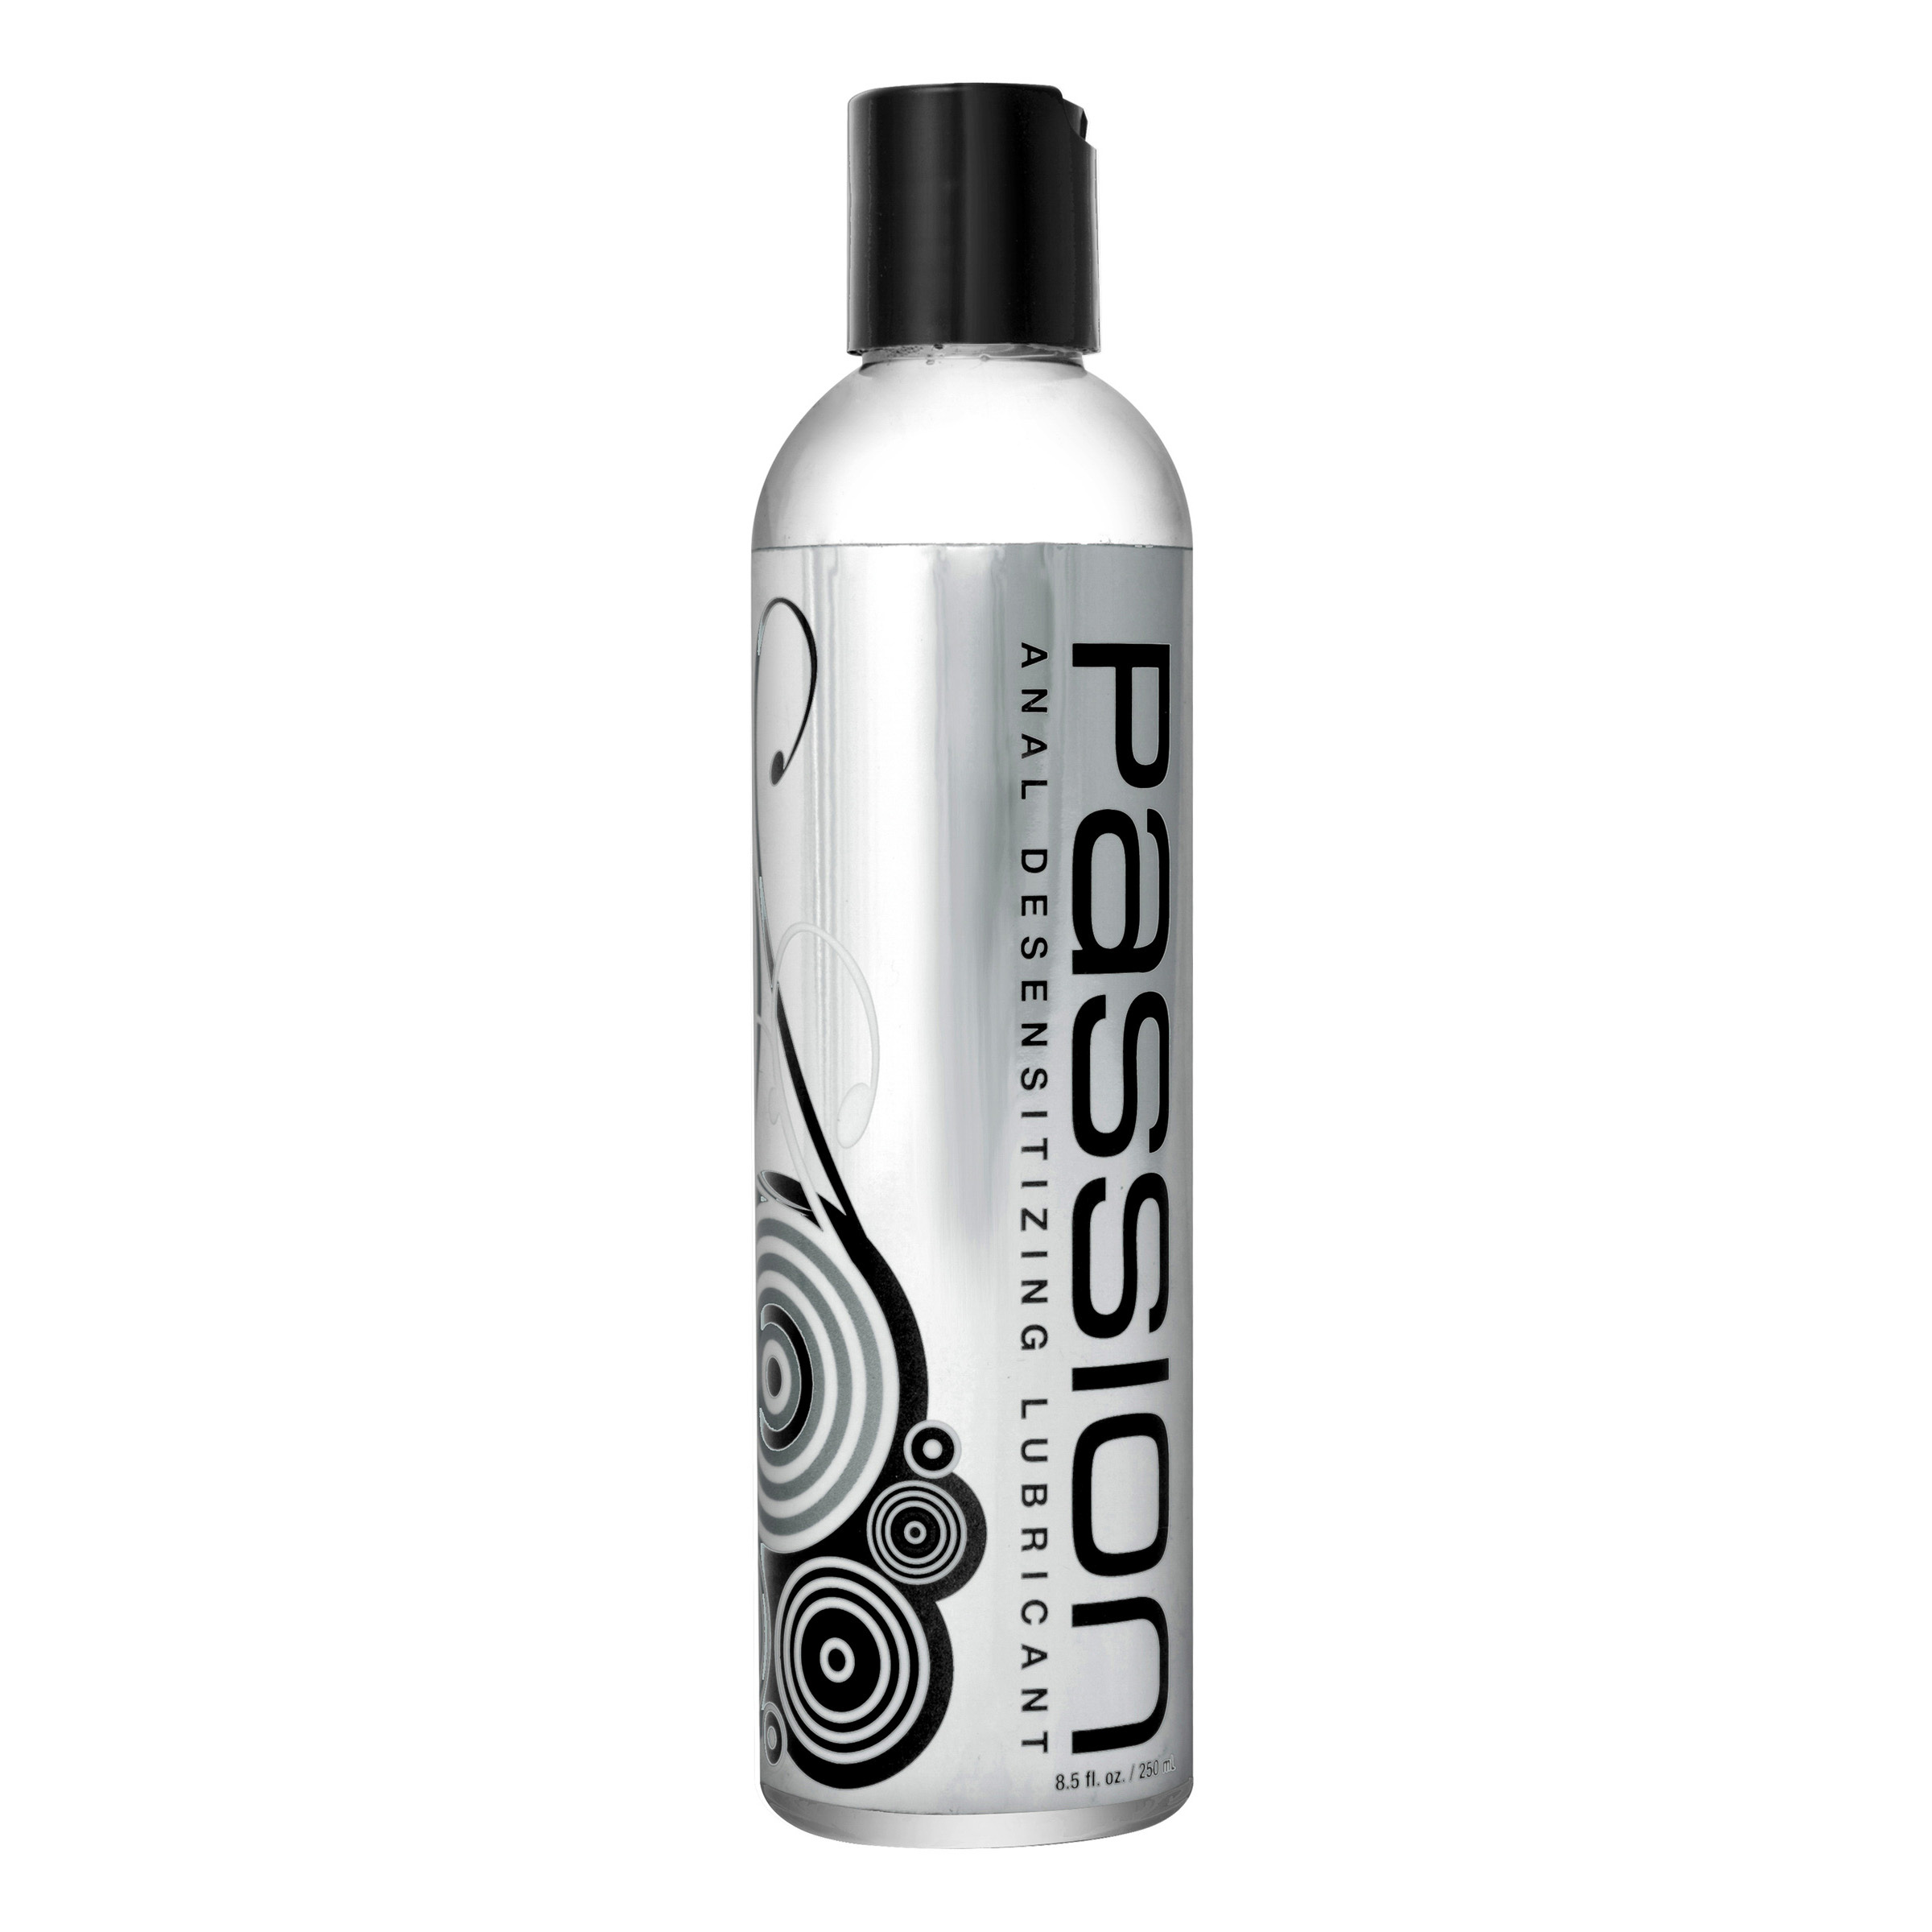 Passion Anal Desensitizing Lubricant with Lidocaine – 8.5 oz